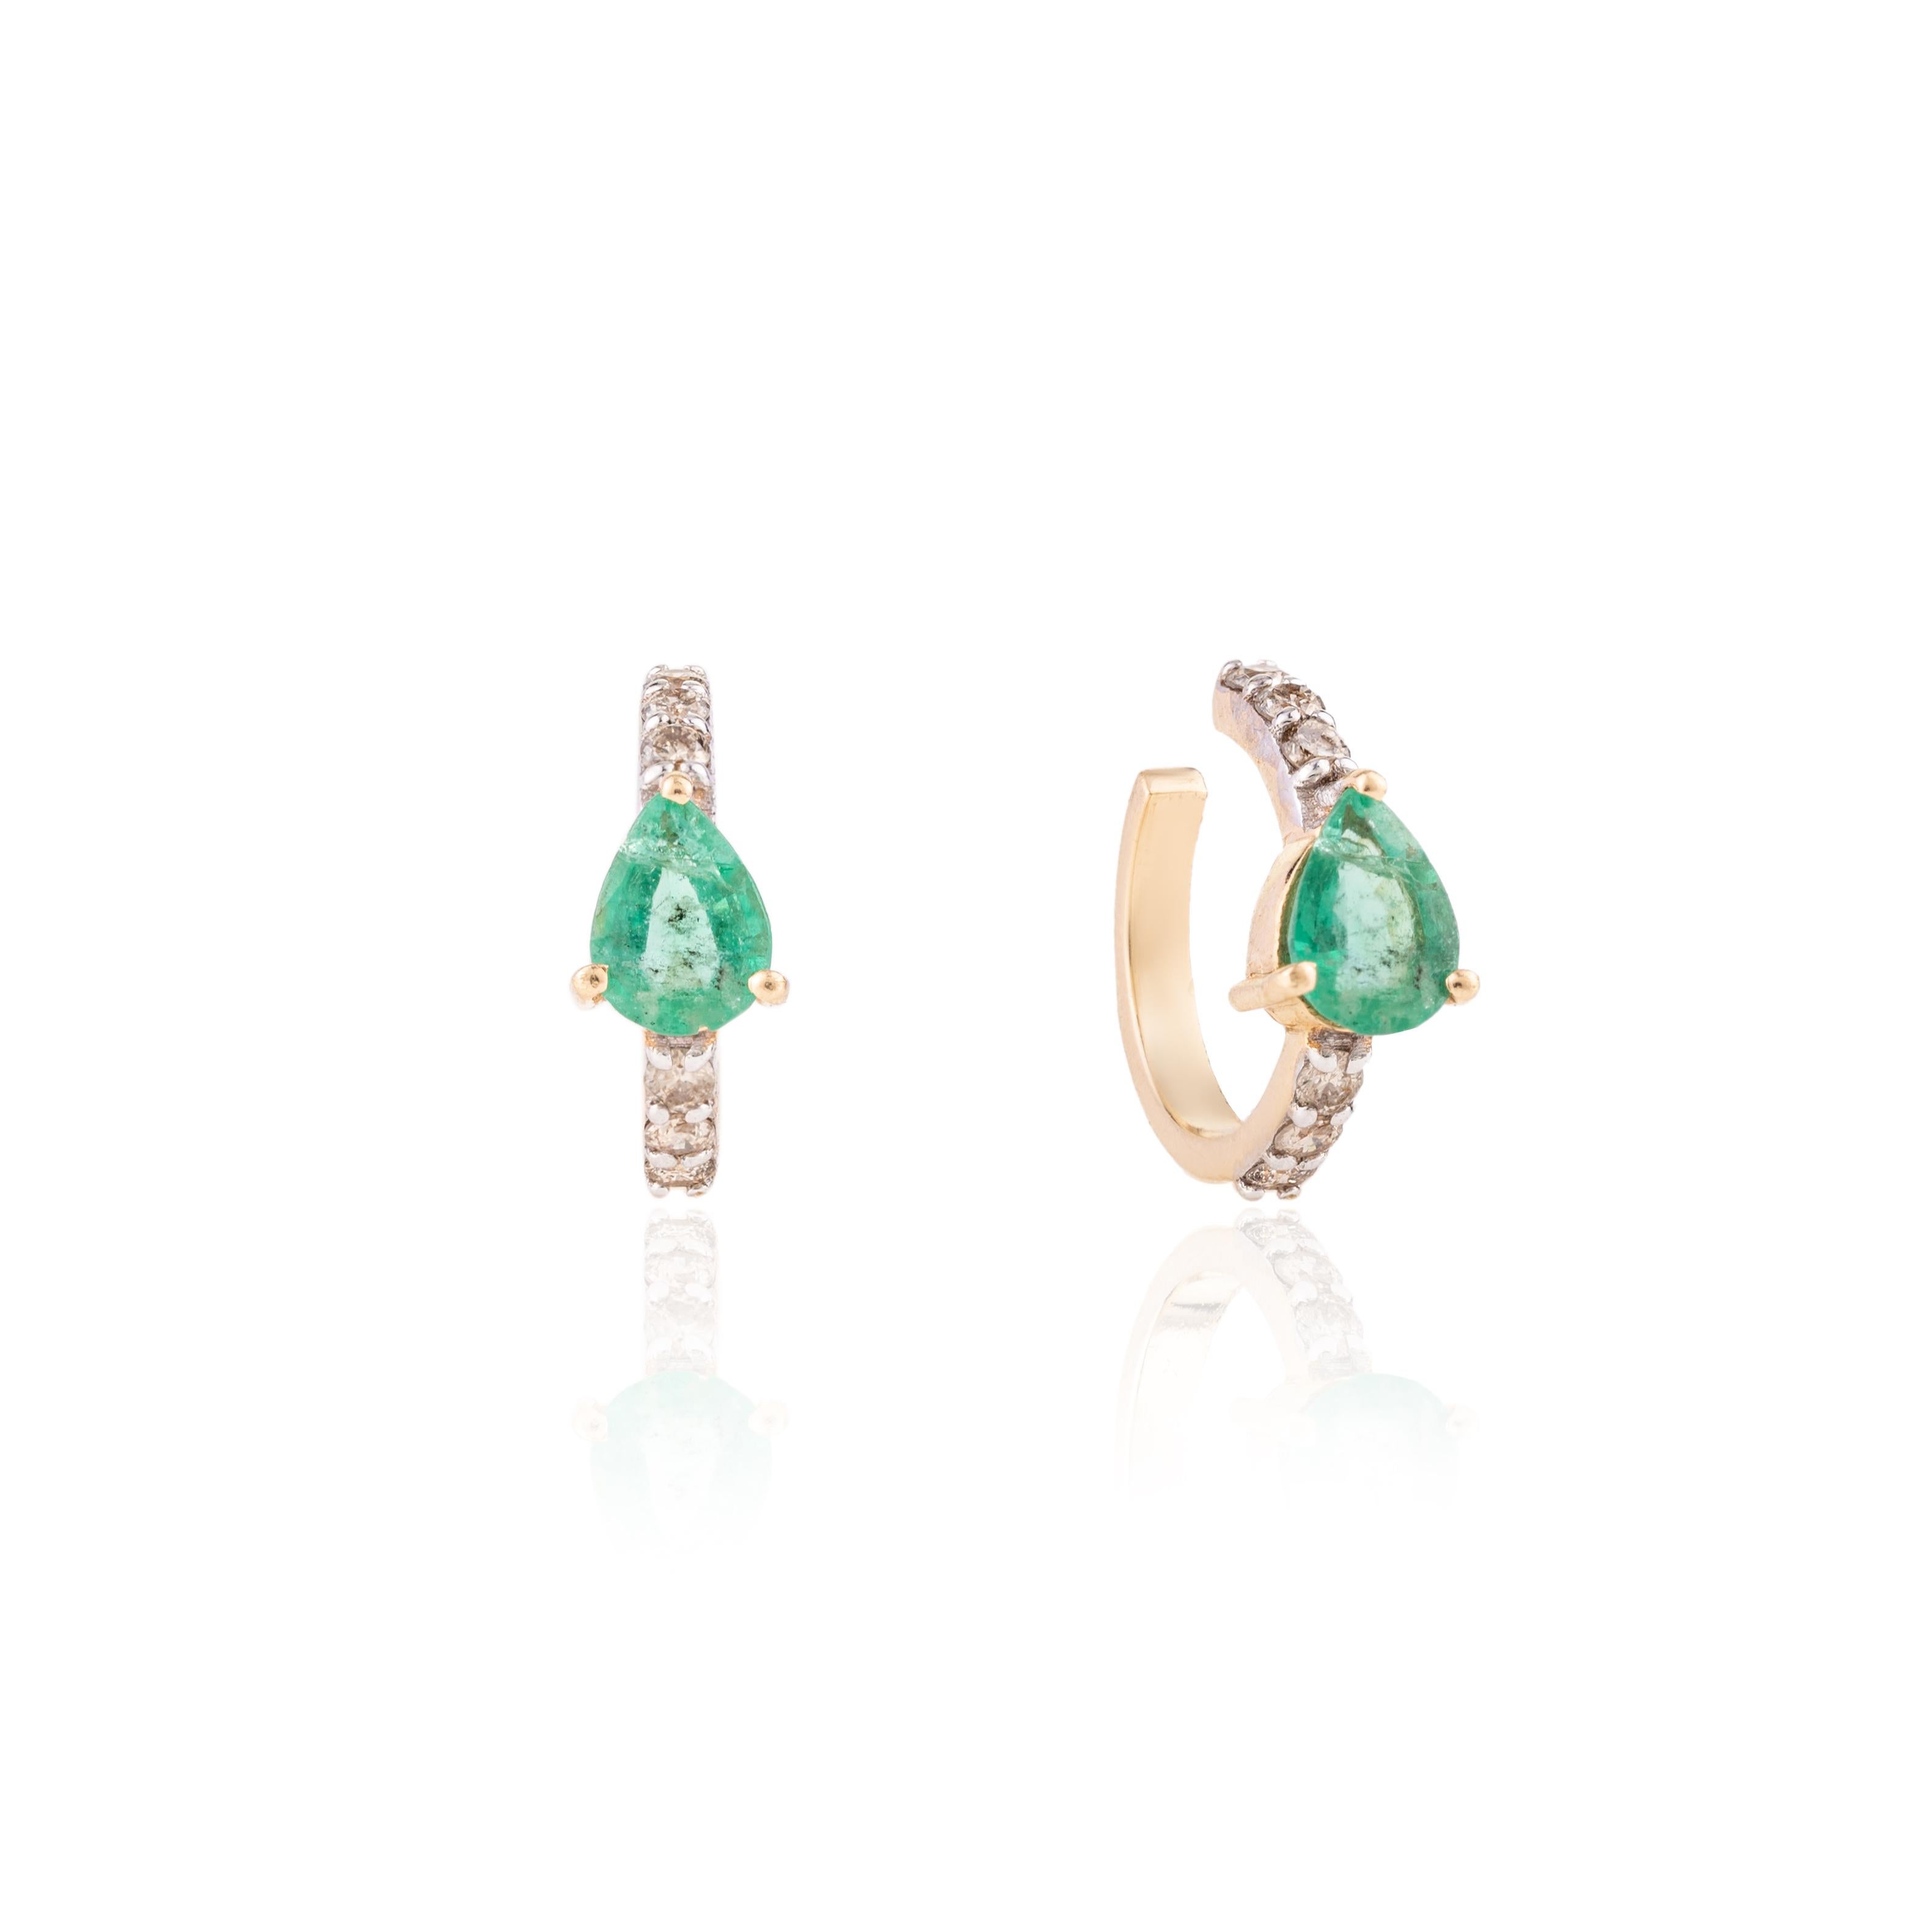 Dainty Emerald Diamond Helix Cuff Earrings in 18K Gold to make a statement with your look. You shall need helix earrings to make a statement with your look. These earrings create a sparkling, luxurious look featuring pear cut emerald and